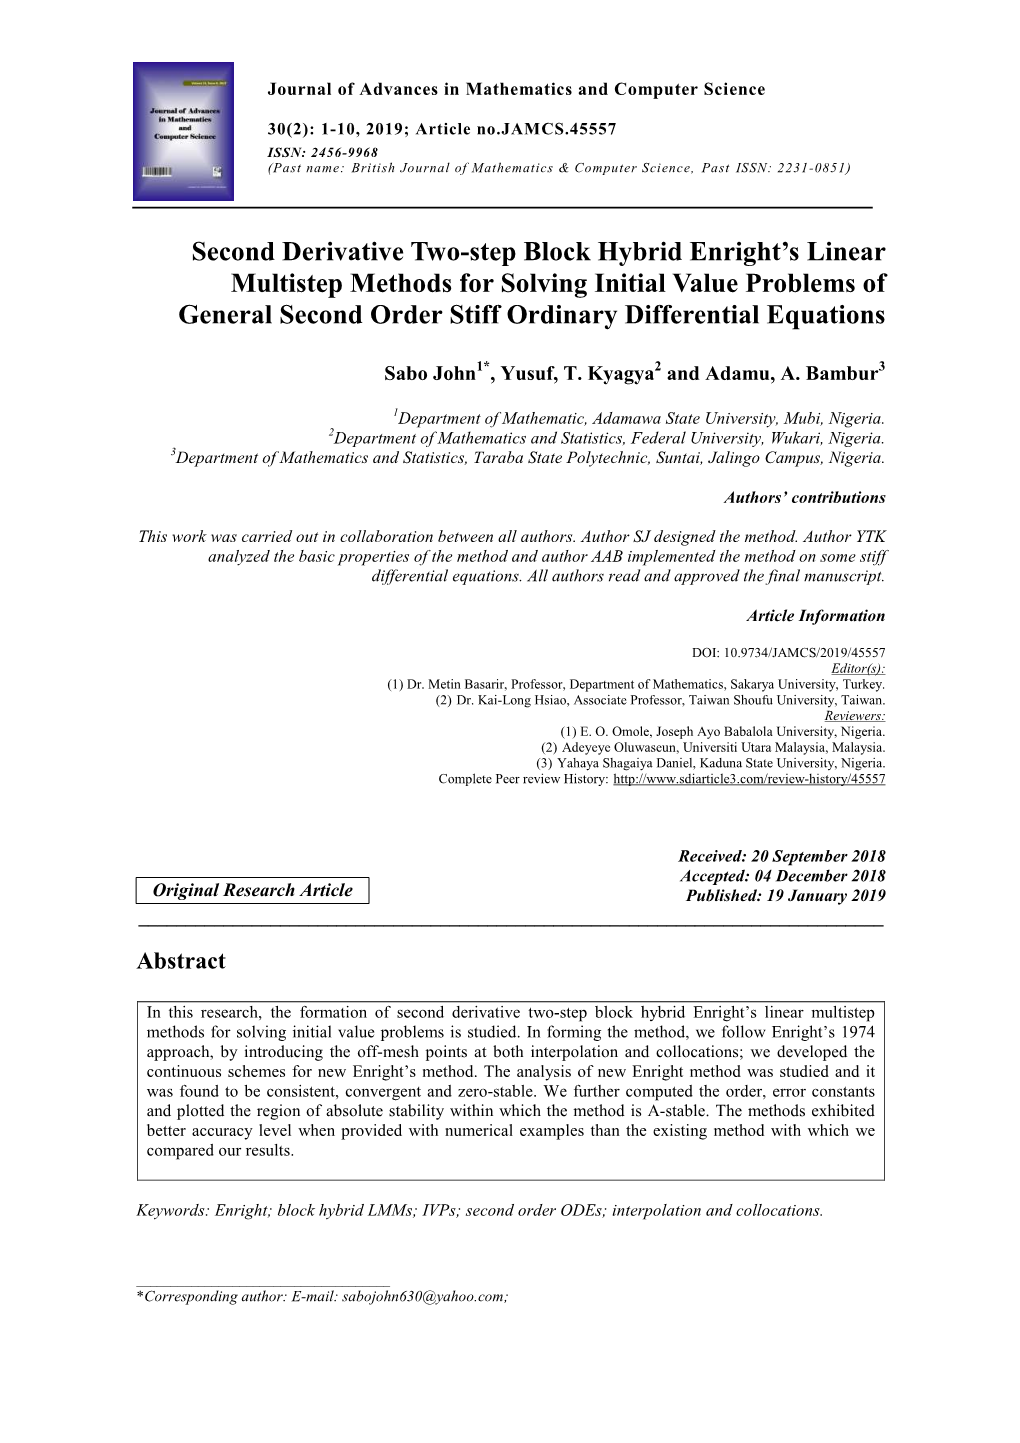 Second Derivative Two-Step Block Hybrid Enright's Linear Multistep Methods for Solving Initial Value Problems of General Secon